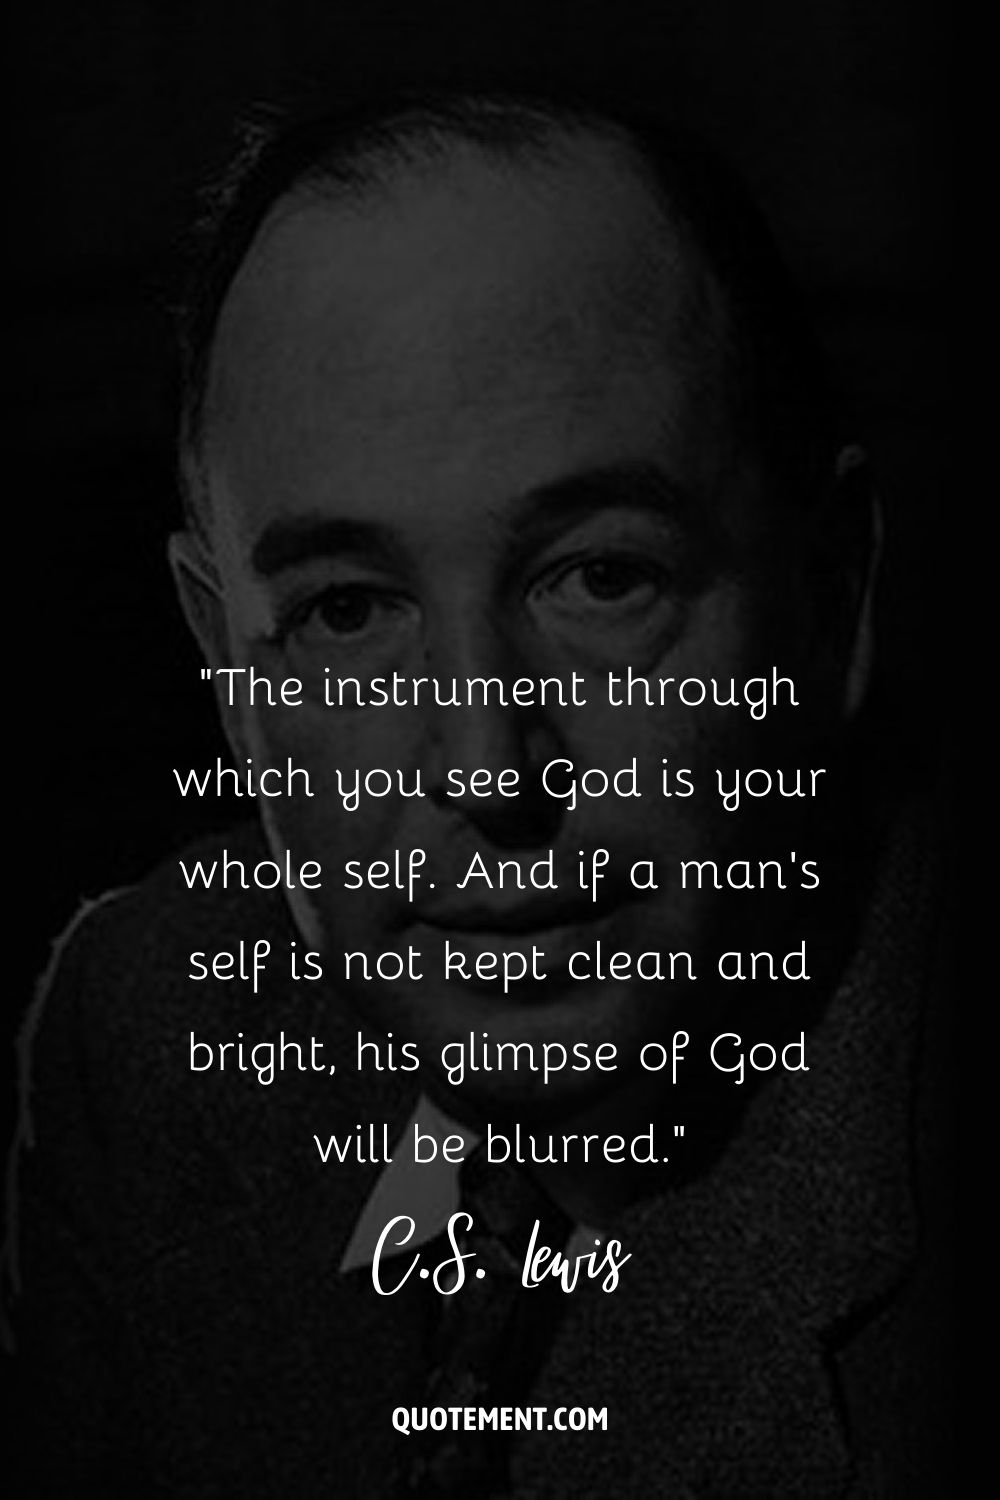 C.S. Lewis, clad in a coat and tie, showcases formal grace in a grayscale portrait